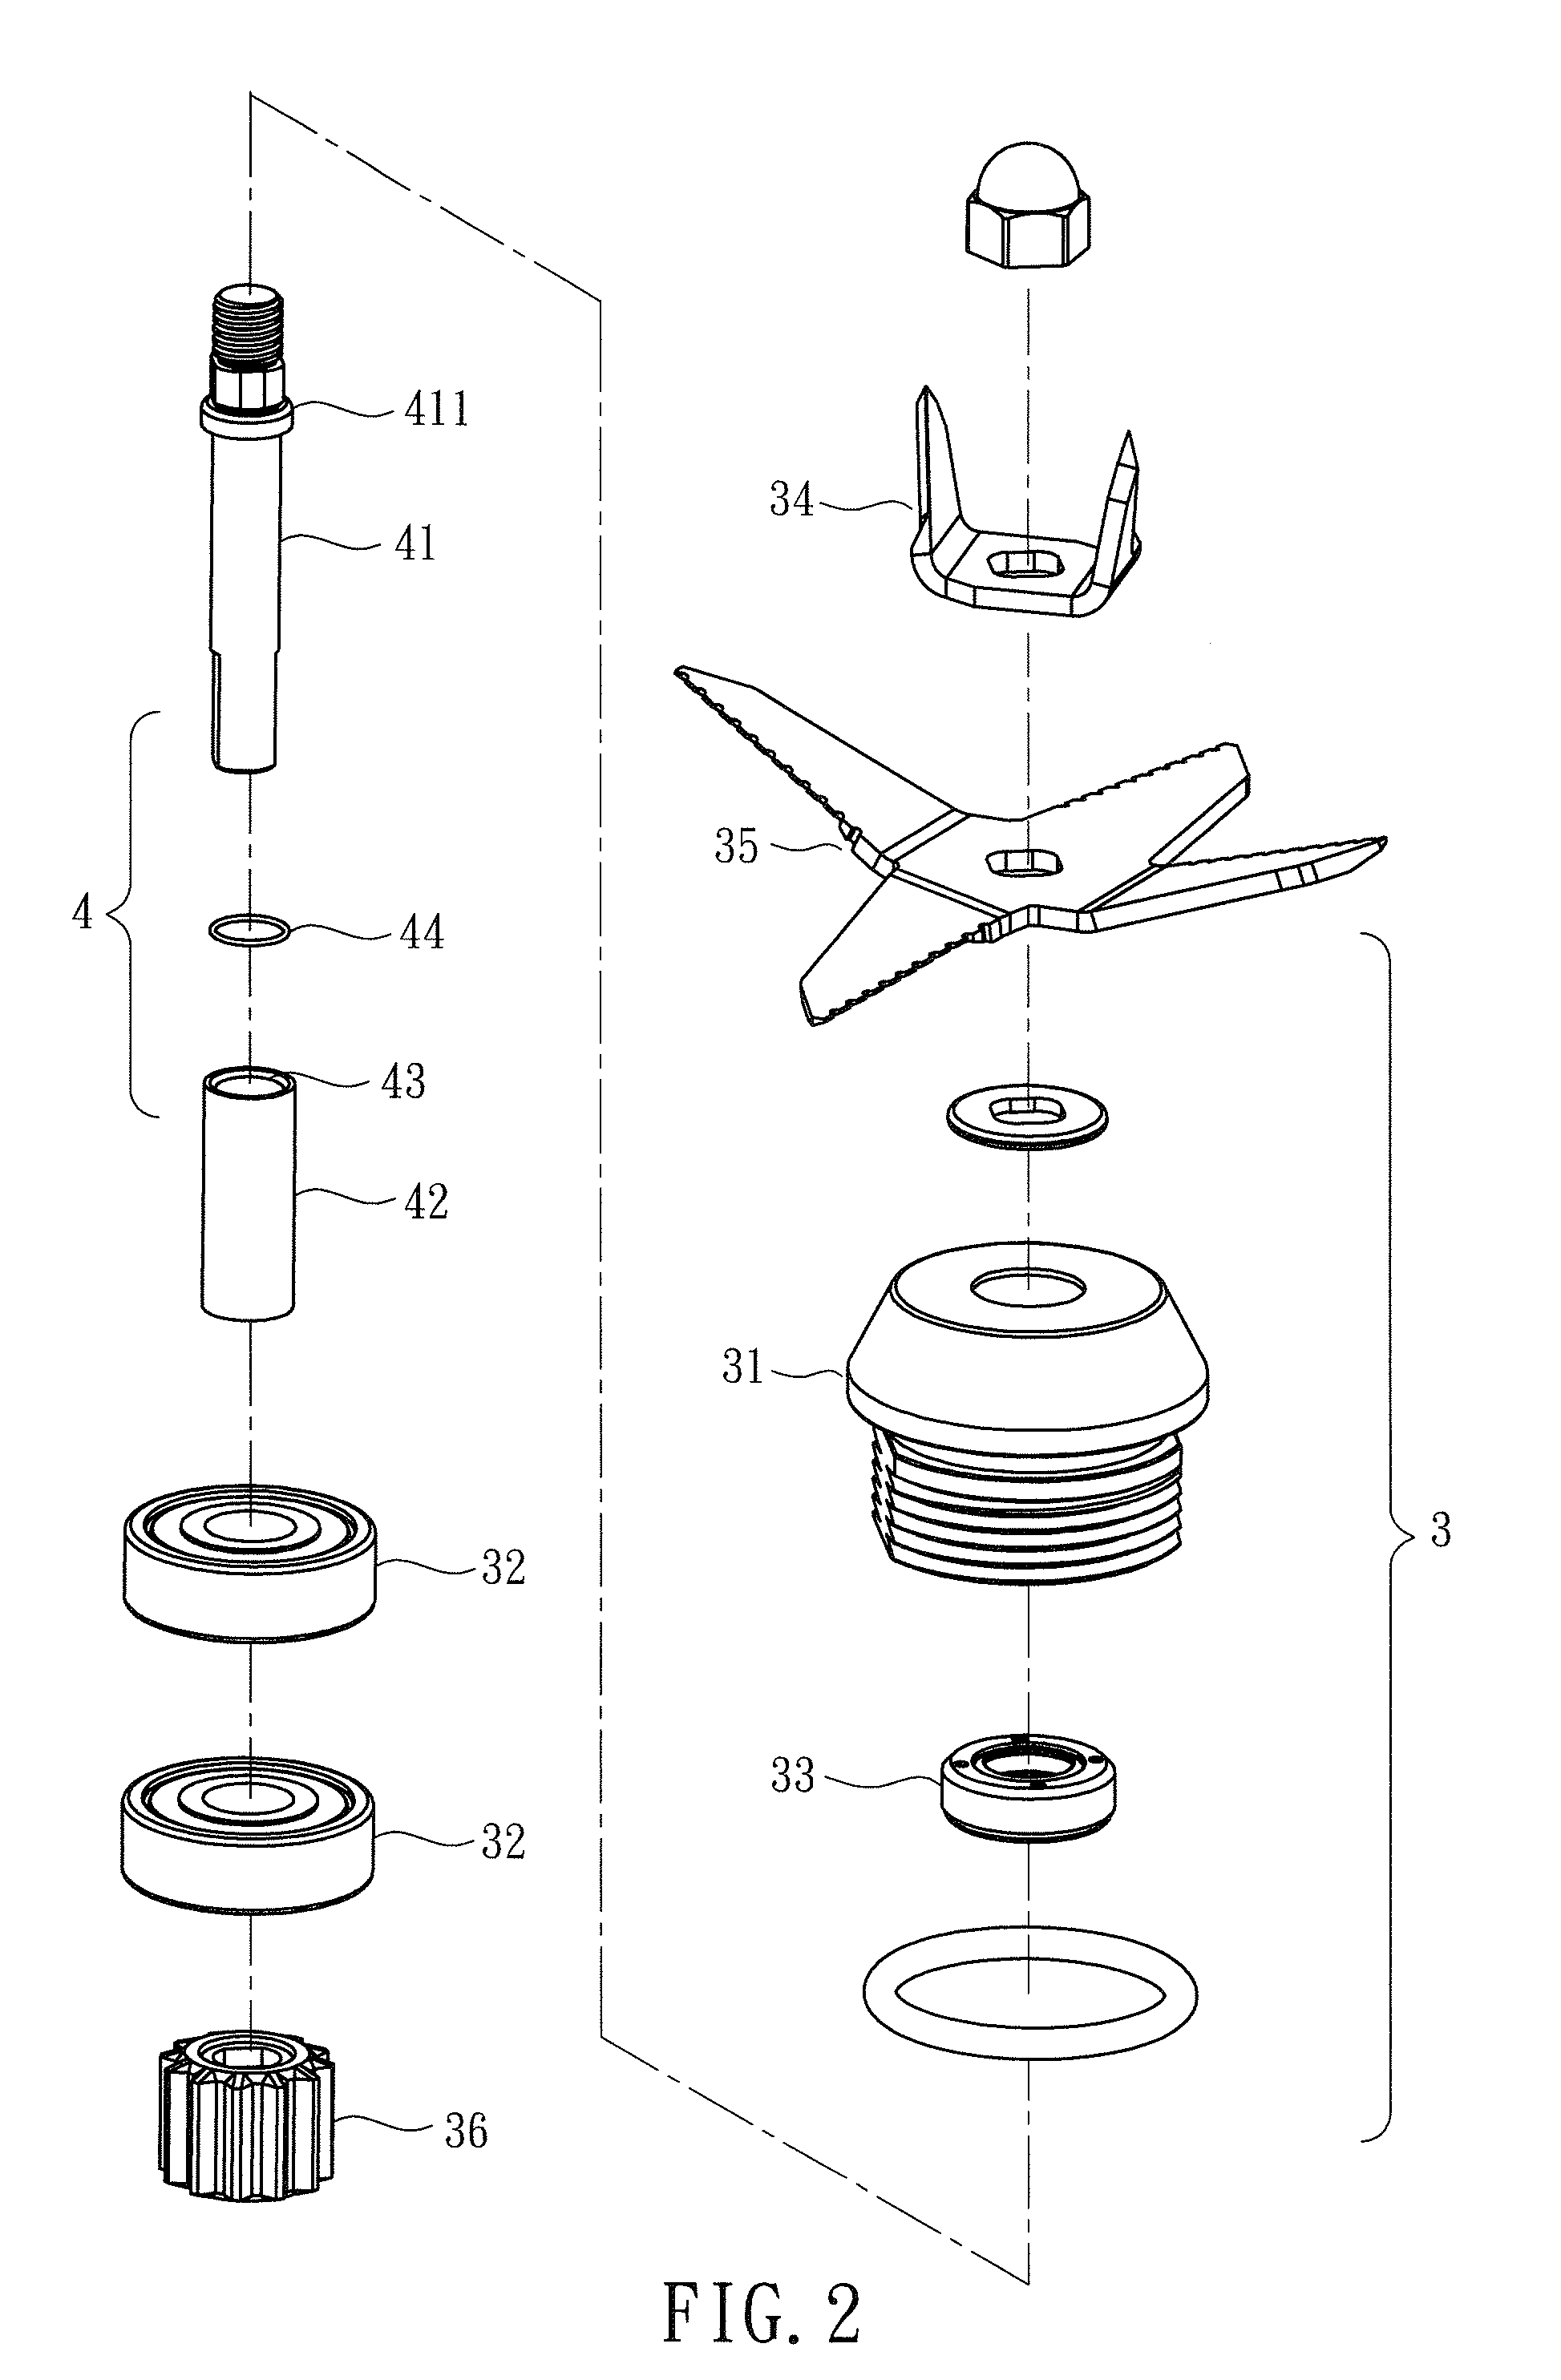 Blenderblade assembly and shaft assembly thereof